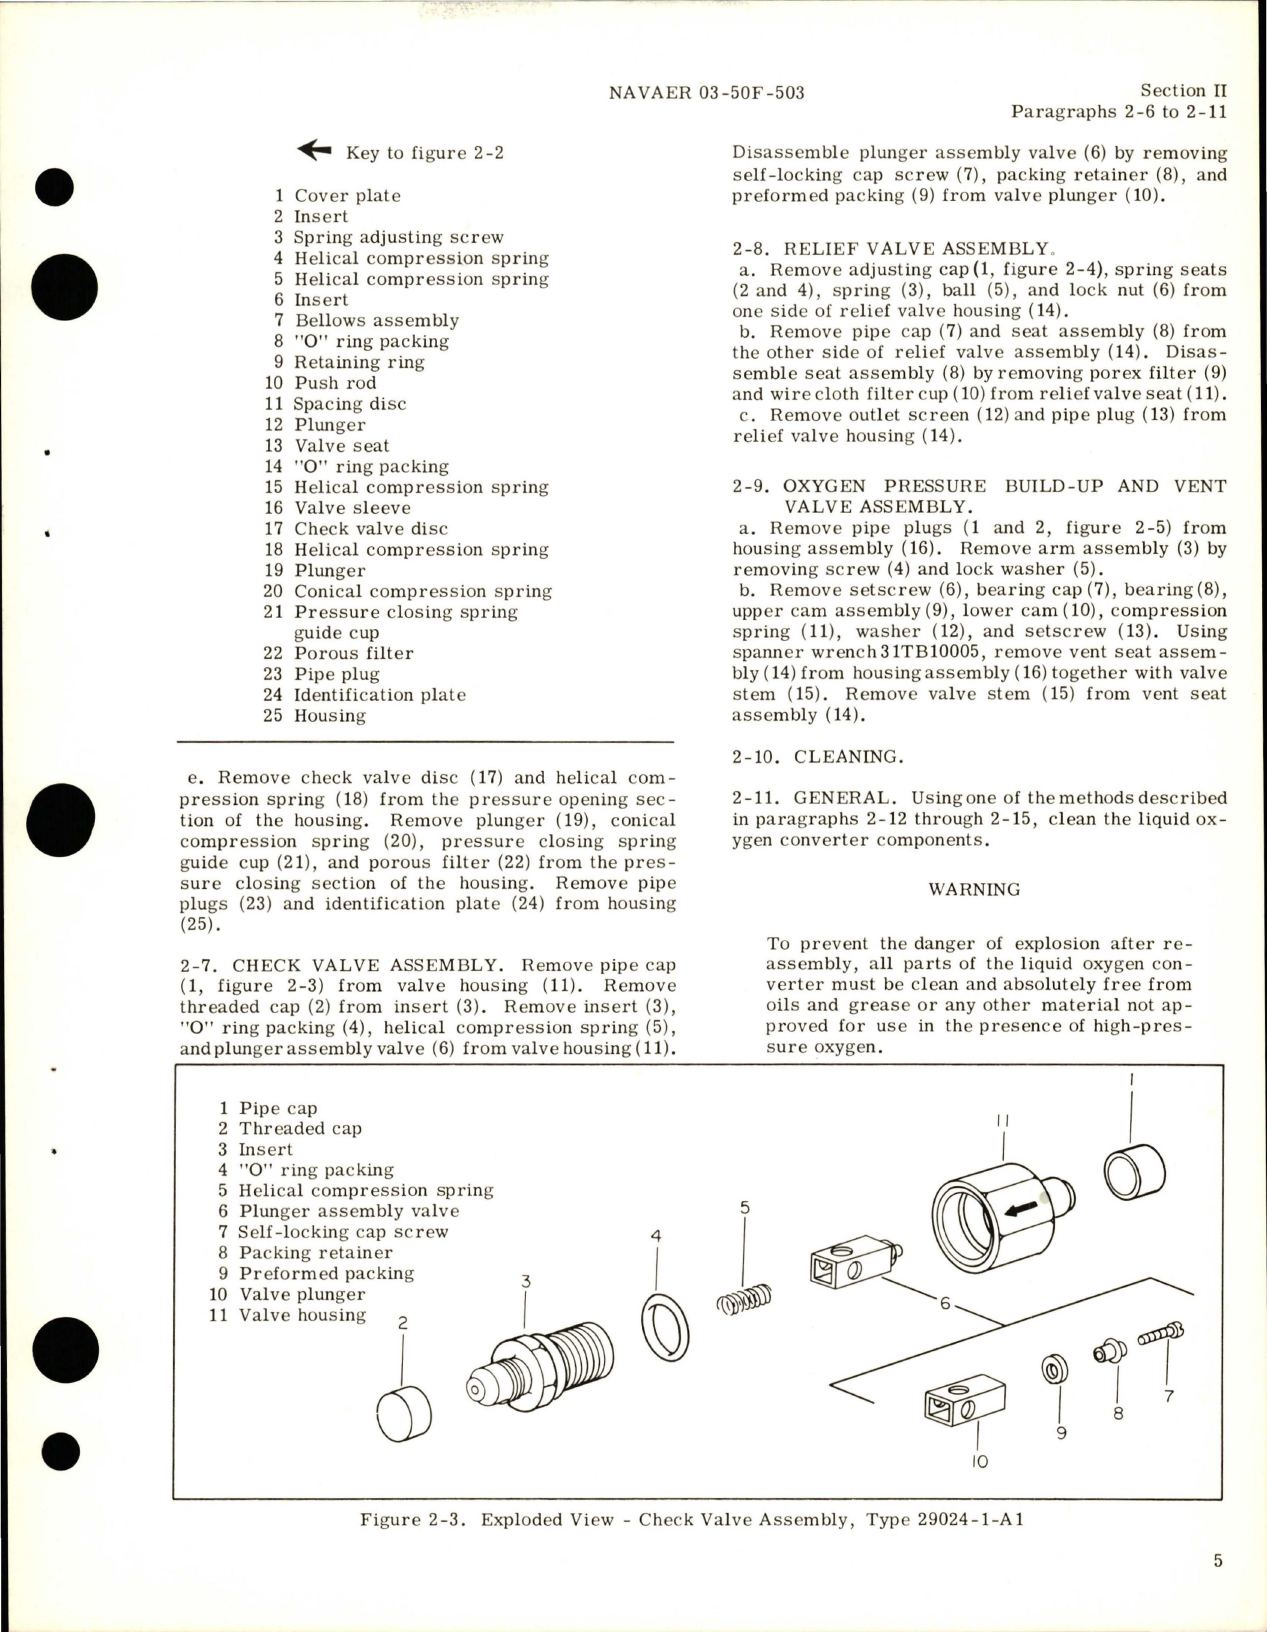 Sample page 9 from AirCorps Library document: Overhaul Instructions for Liquid Oxygen Converter - Types 29019-1-A1, 29023-1-A1, 29024-1-A1, and 29024-1-B1